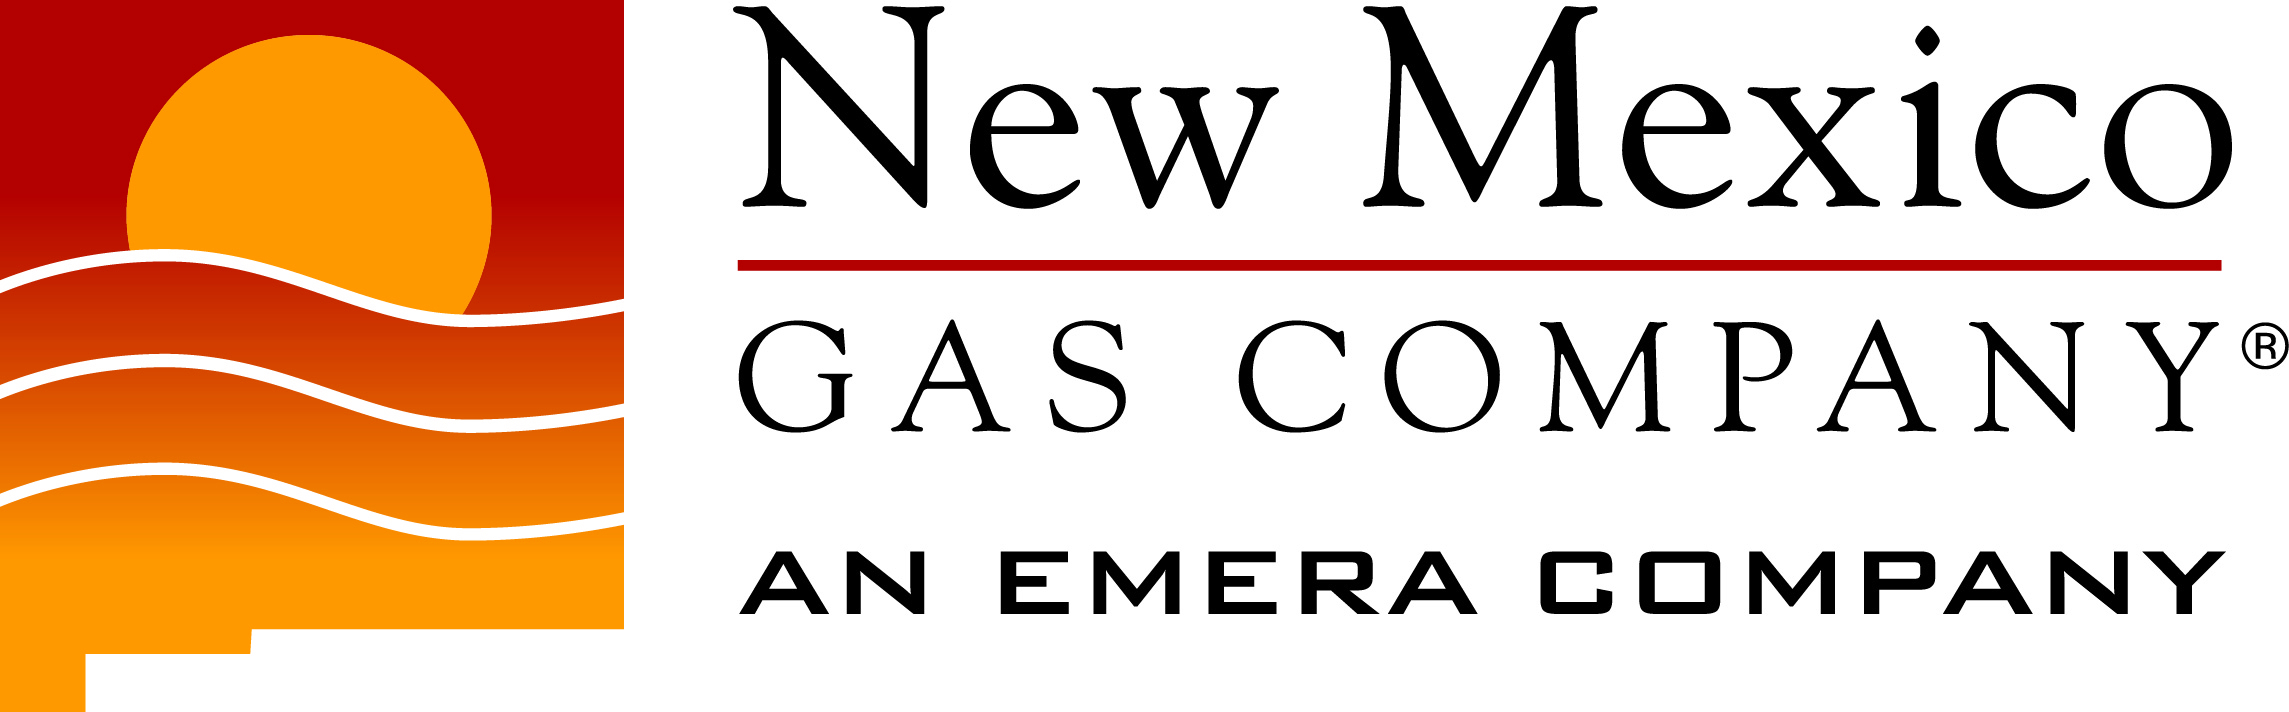 2018 Sponsors New Mexico Ethics In Business Awards